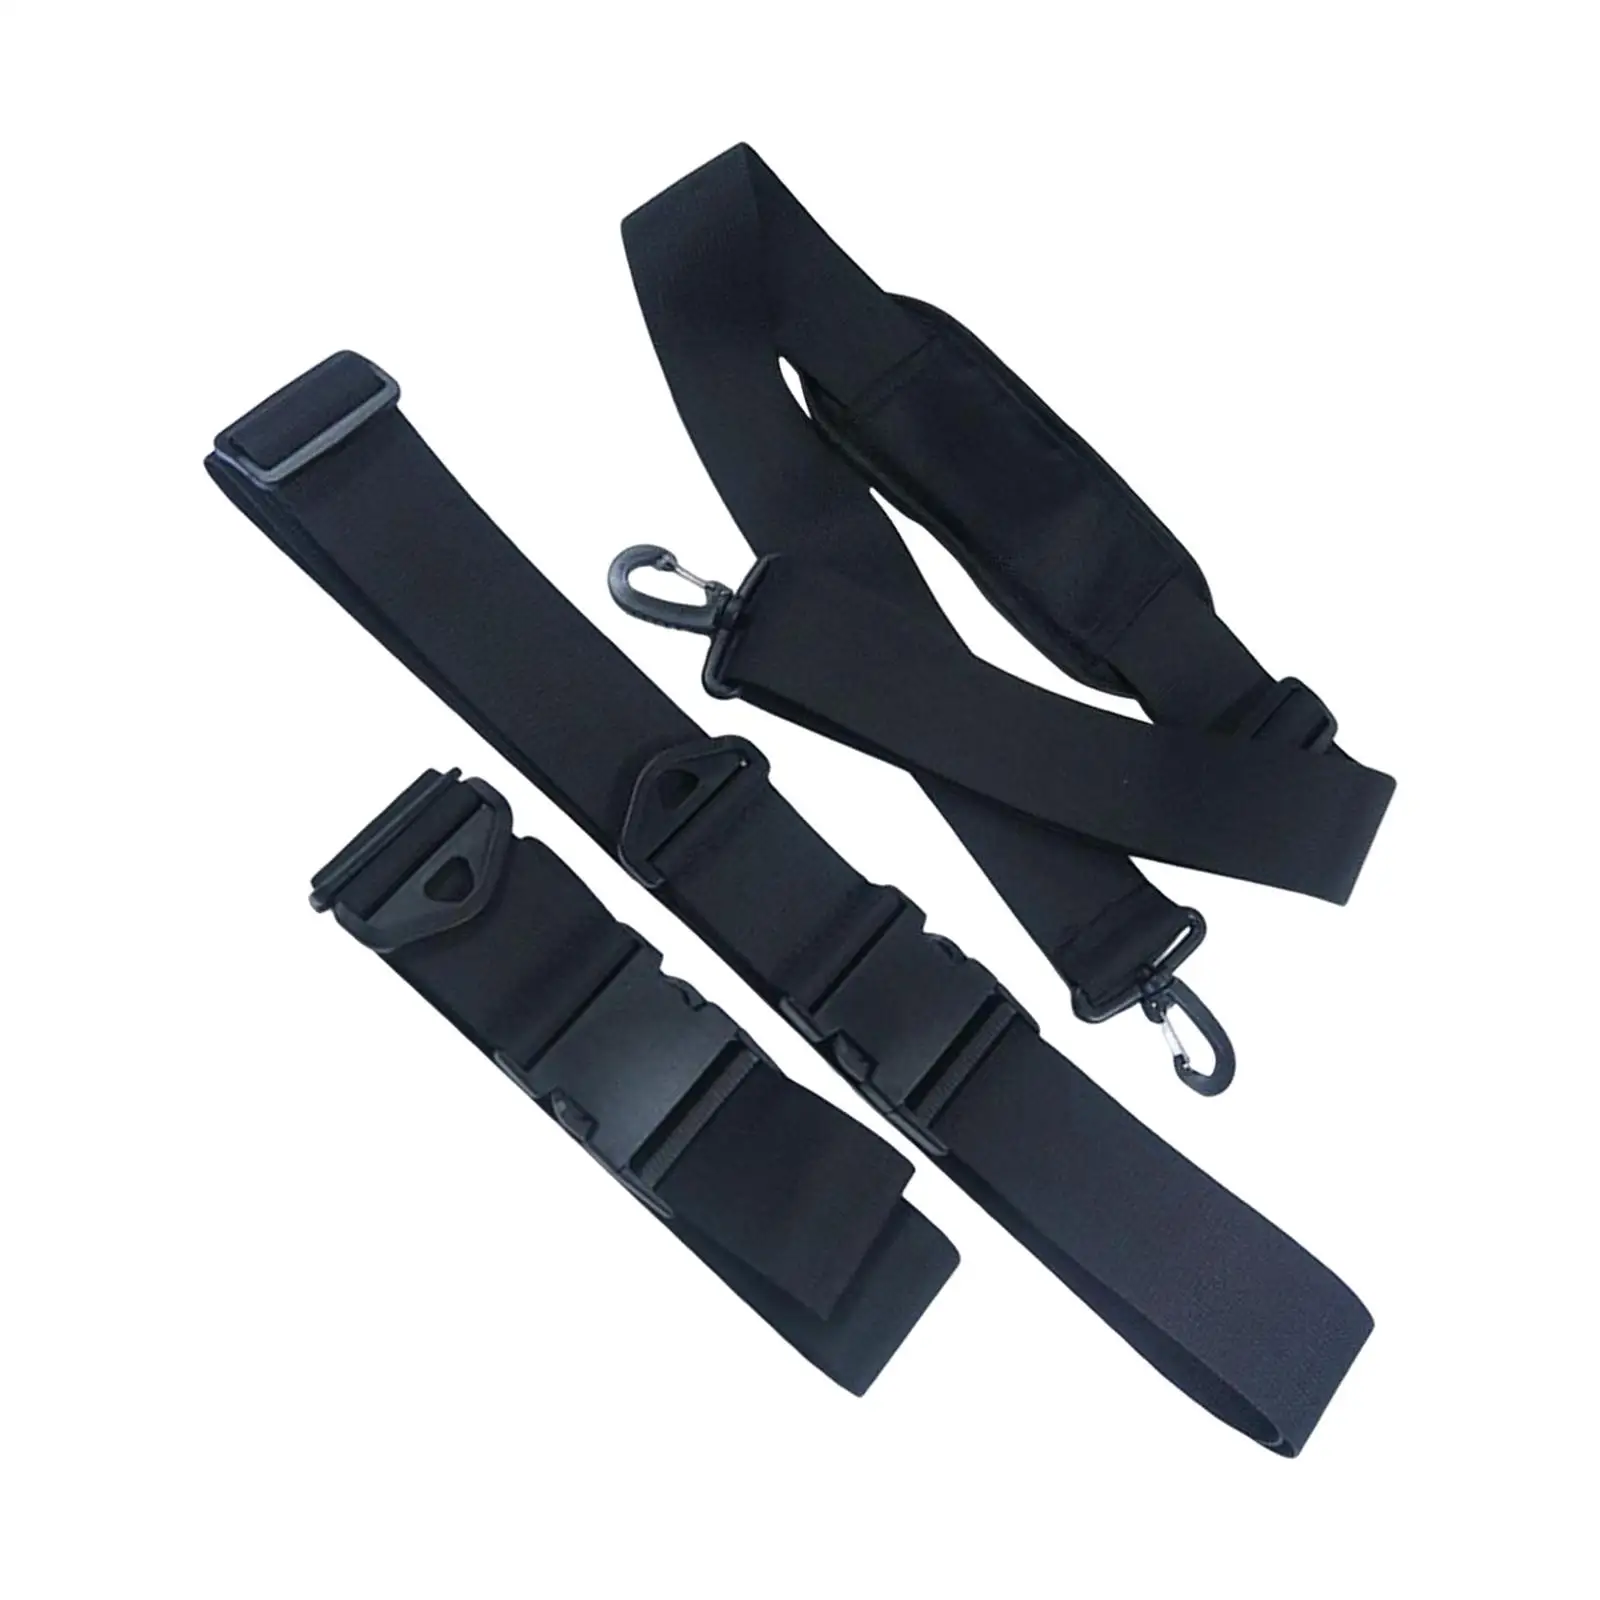 Carrying Sling Carrier Universal Surfboard Beach Paddle Board Shoulder Strap